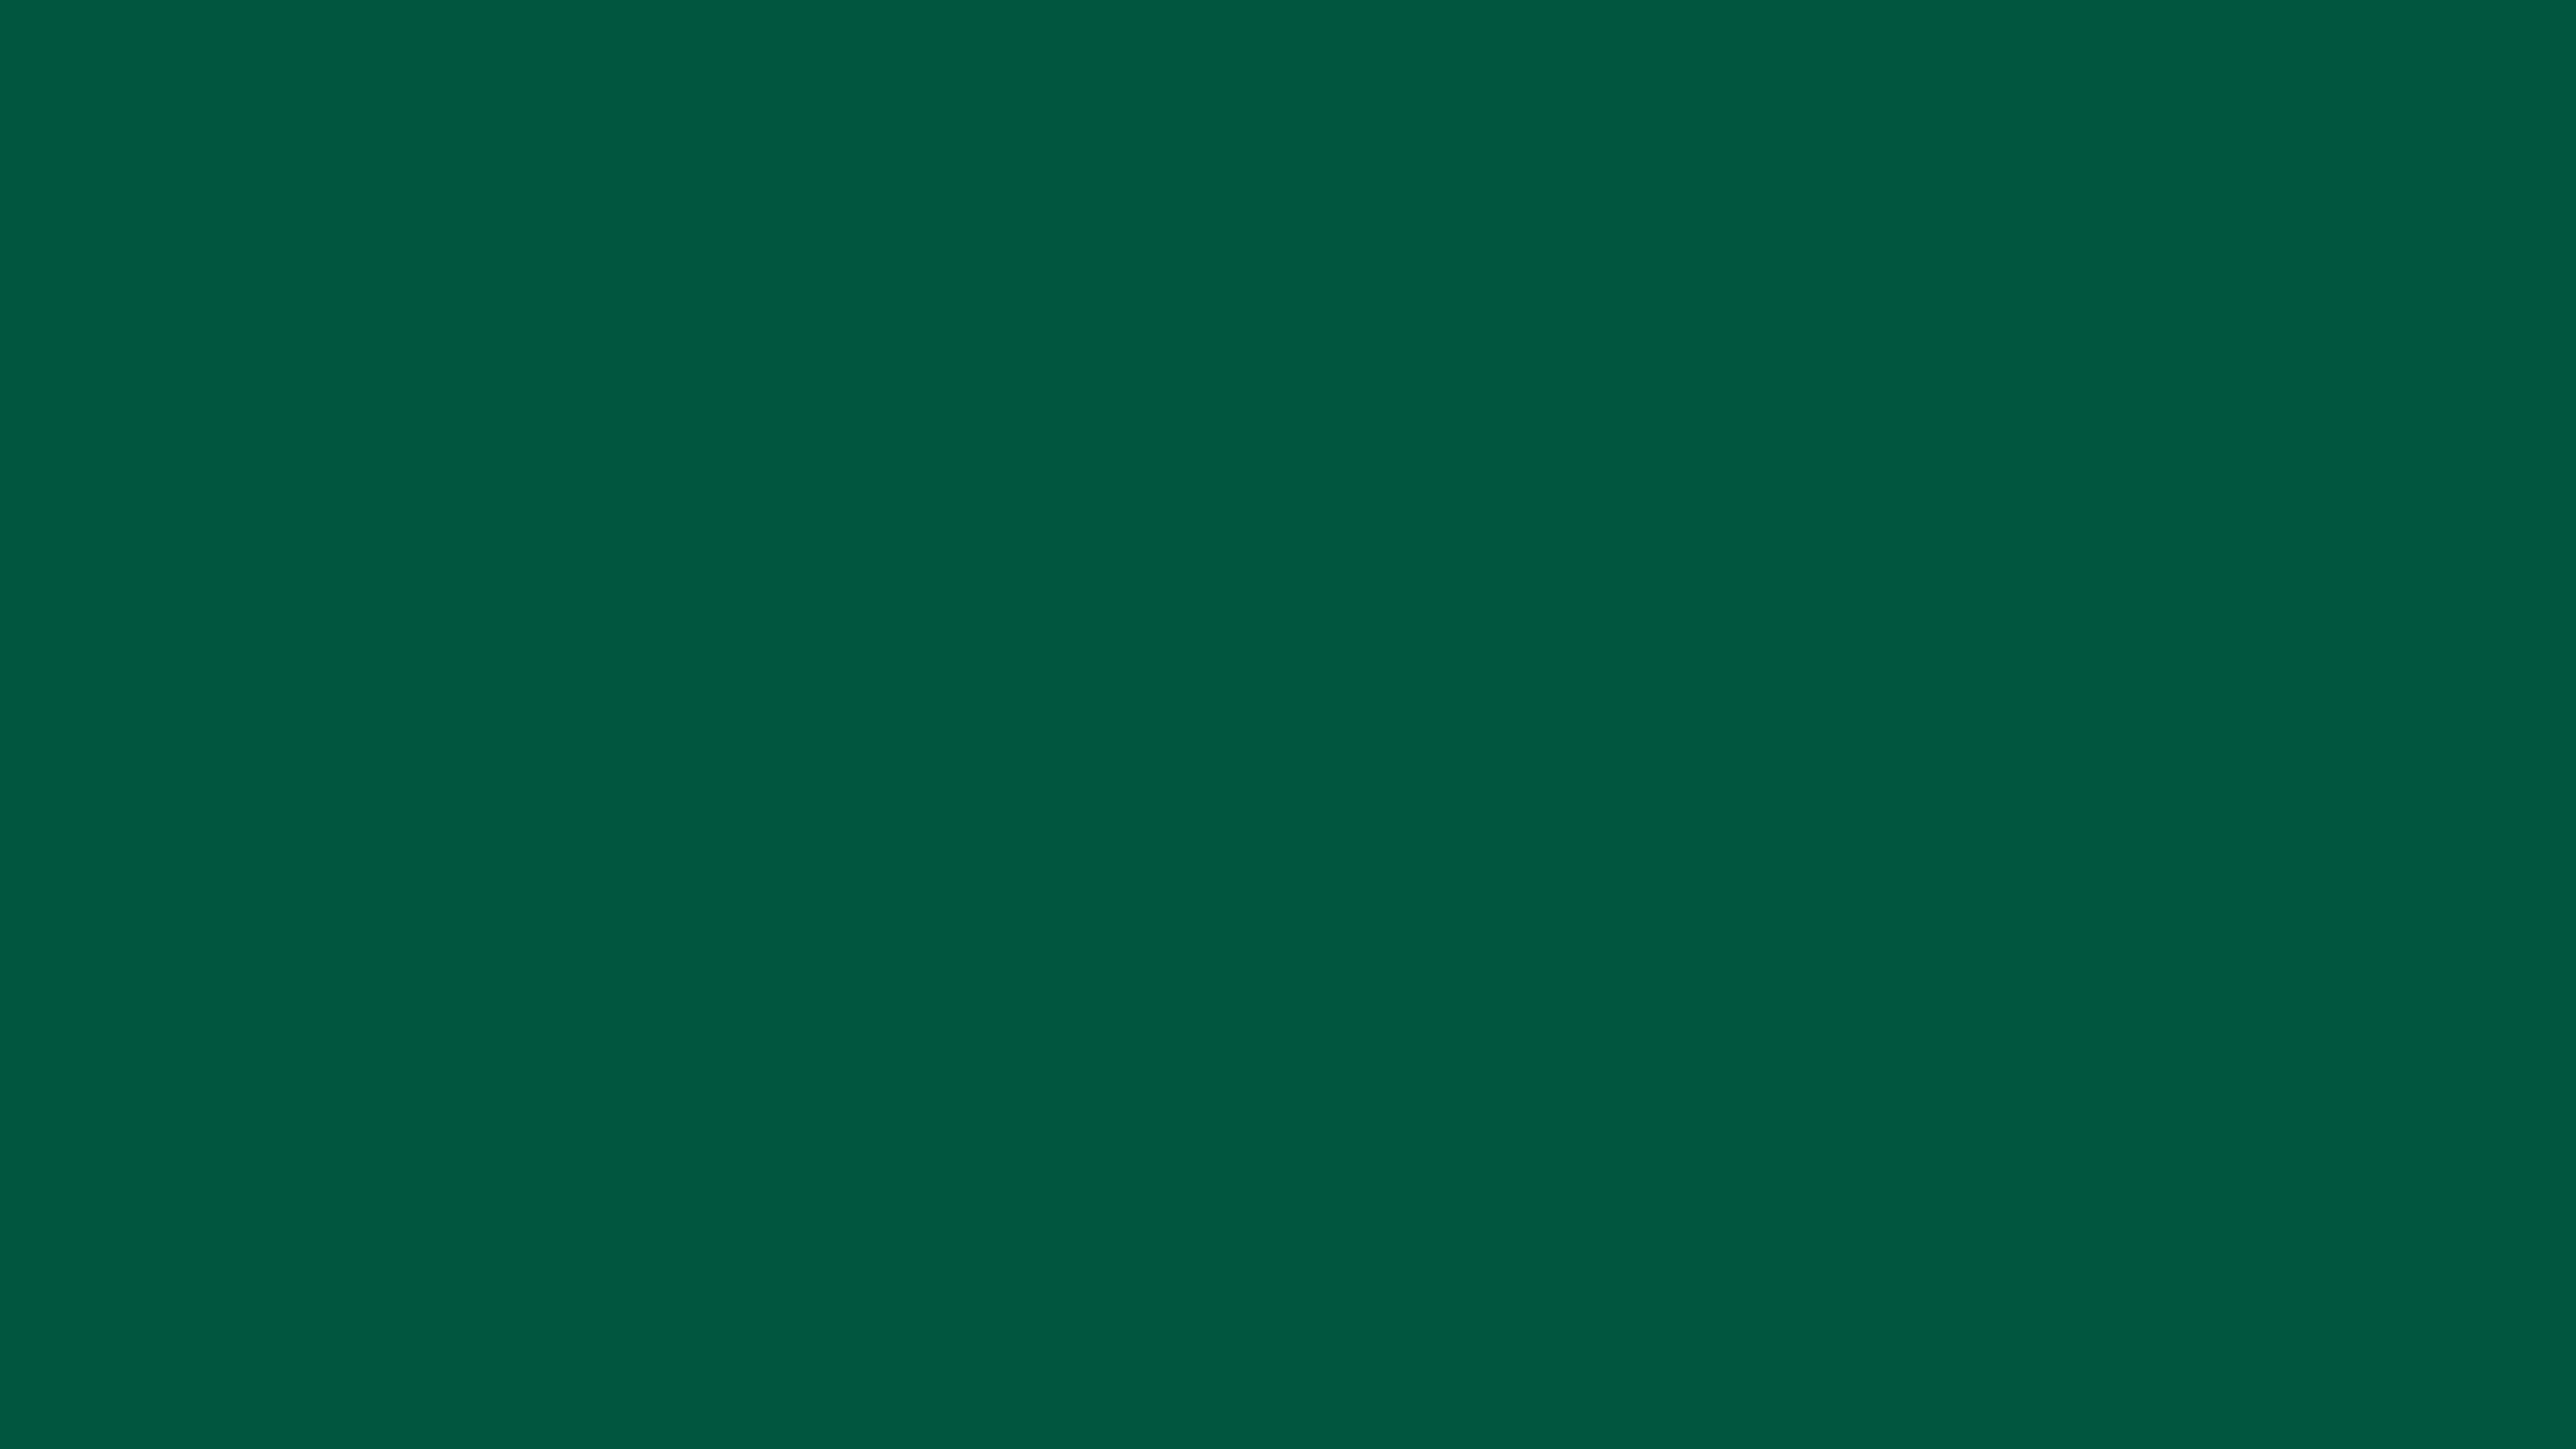 7680x4320 Sacramento State Green Solid Color Background